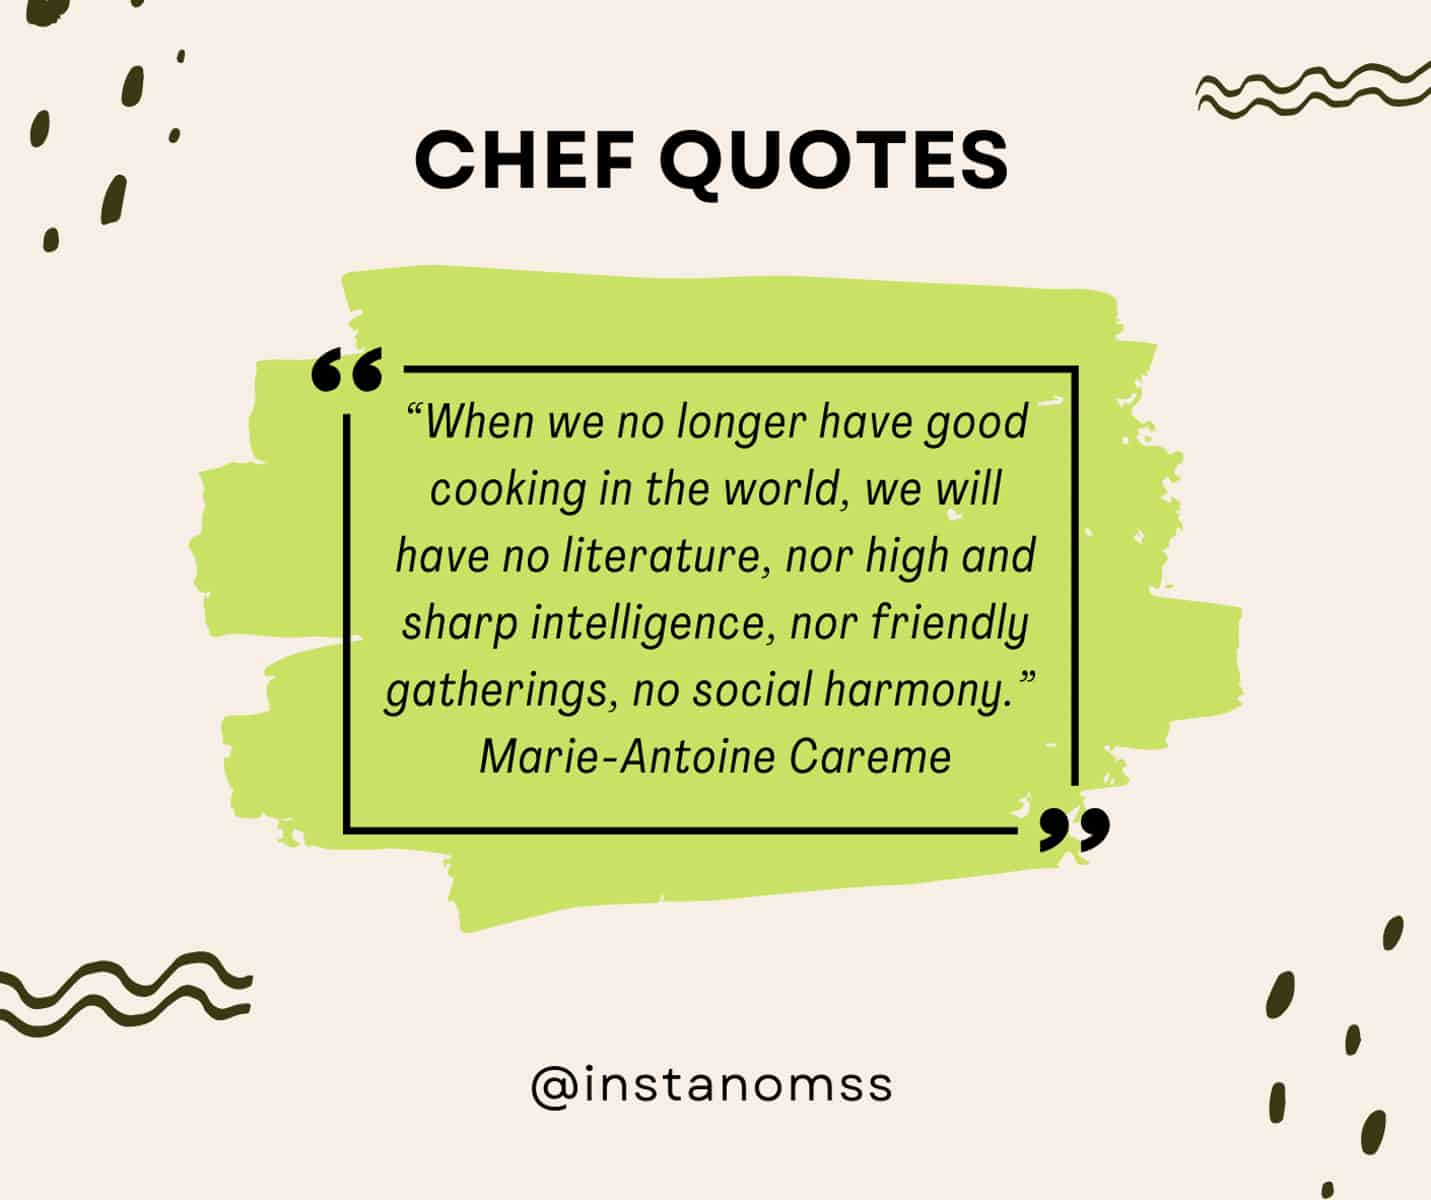 “When we no longer have good cooking in the world, we will have no literature, nor high and sharp intelligence, nor friendly gatherings, no social harmony.” Marie-Antoine Careme